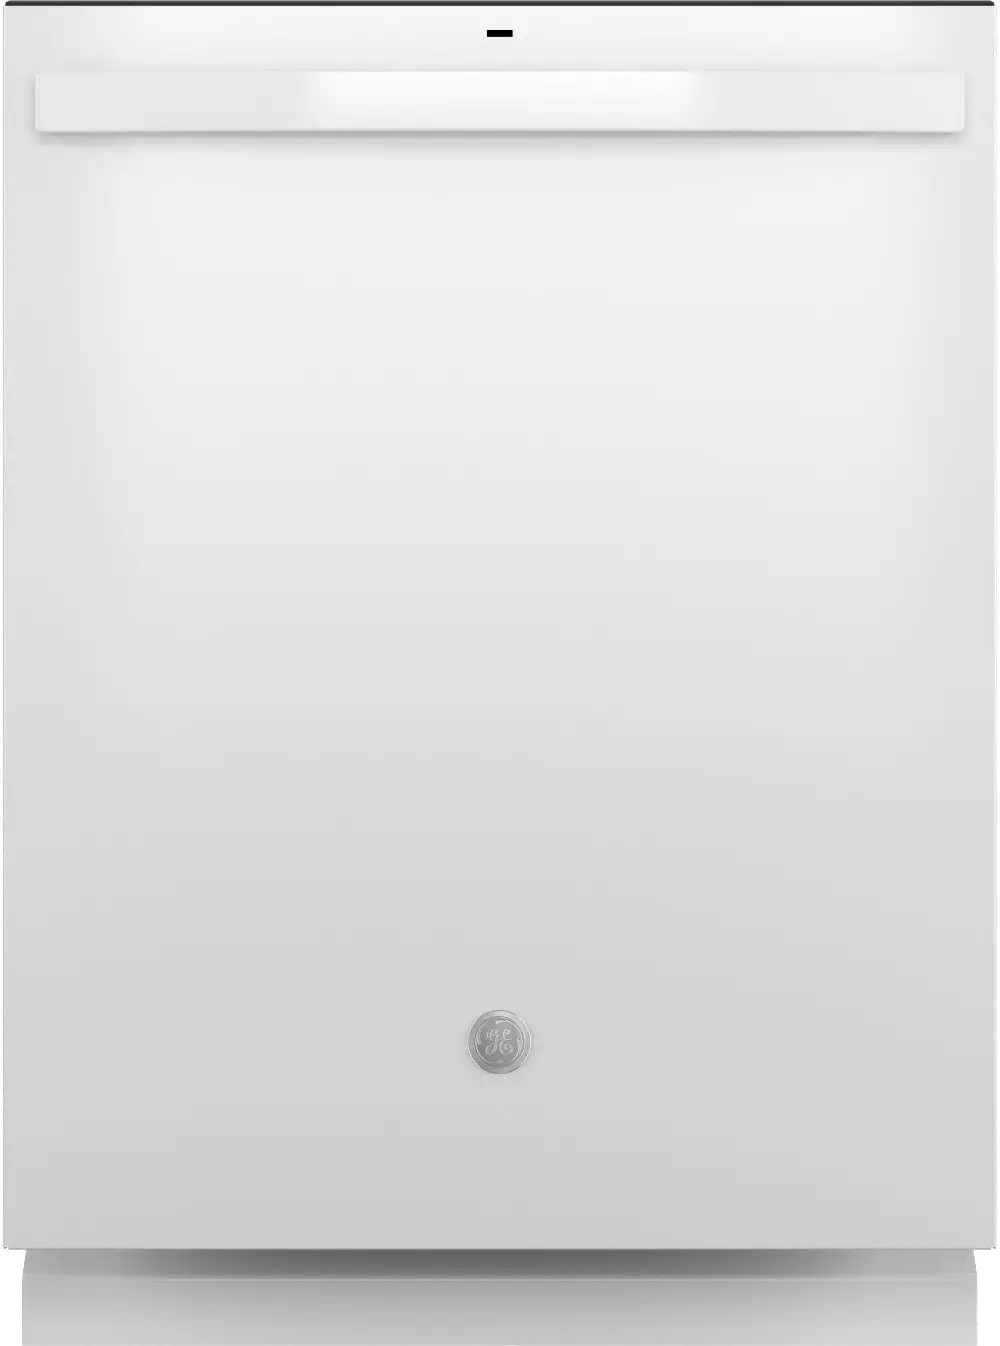 GDT630PGRWW GE Top Control Dishwasher - White-1